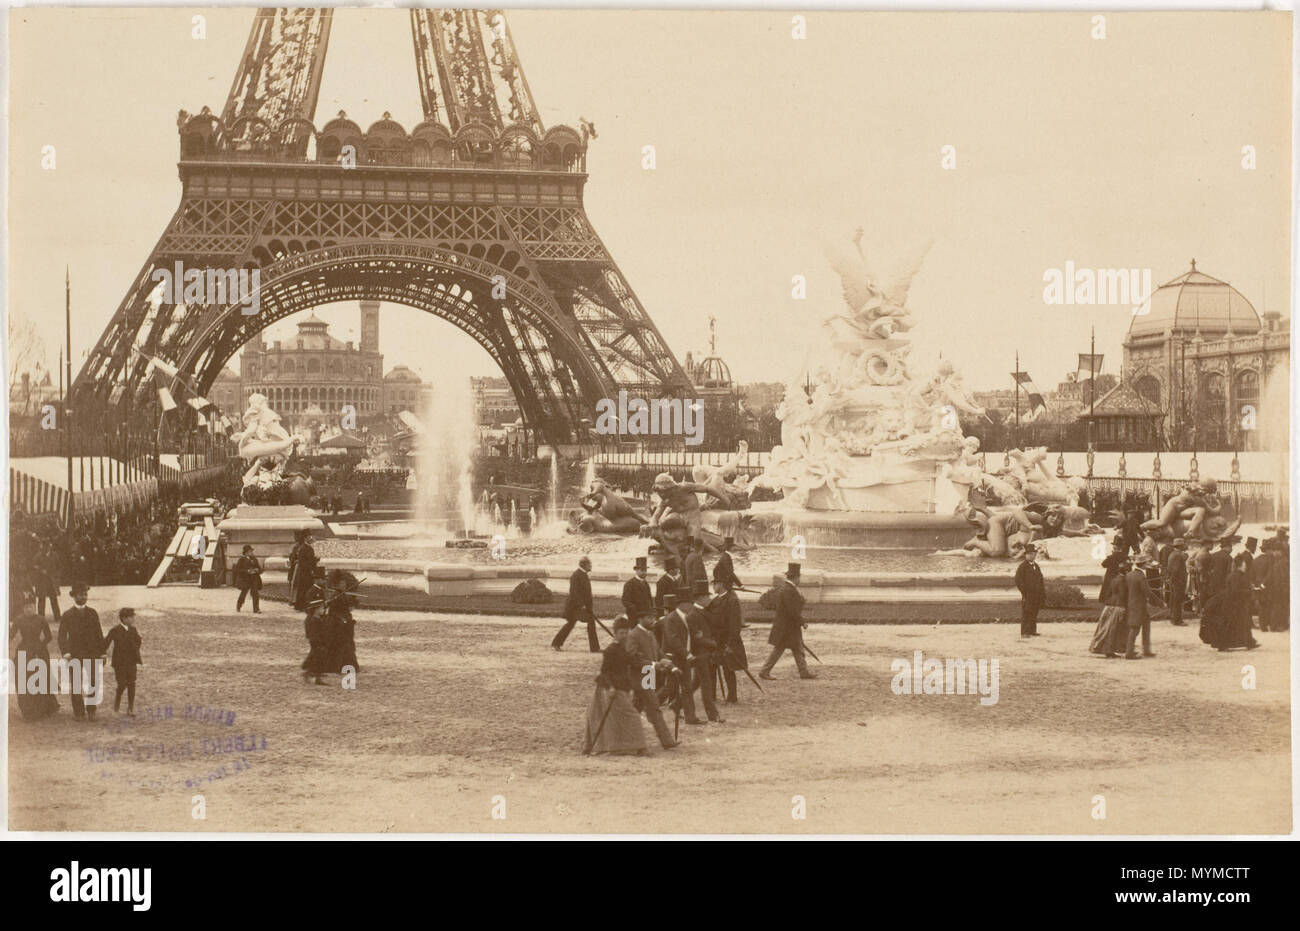 . English: Black and white photograph taken during the Exposition Universelle (1889) from the Champ-de-Mars towards the Trocadero palace (1878) showing the Monumental fountain (1889) in the foreground, the Eiffel Tower arch and, on the right hand, the main entrance of thePalace of Fine-Arts. The striped tents on both sides of the Champ-de-Mars, typical for the 1889 exposition and the Palace of Fine Arts were distroyed after the event. 1889. Unknown 408 Paris Exposition 1889 Champ-de-Mars towards Trocadero Stock Photo